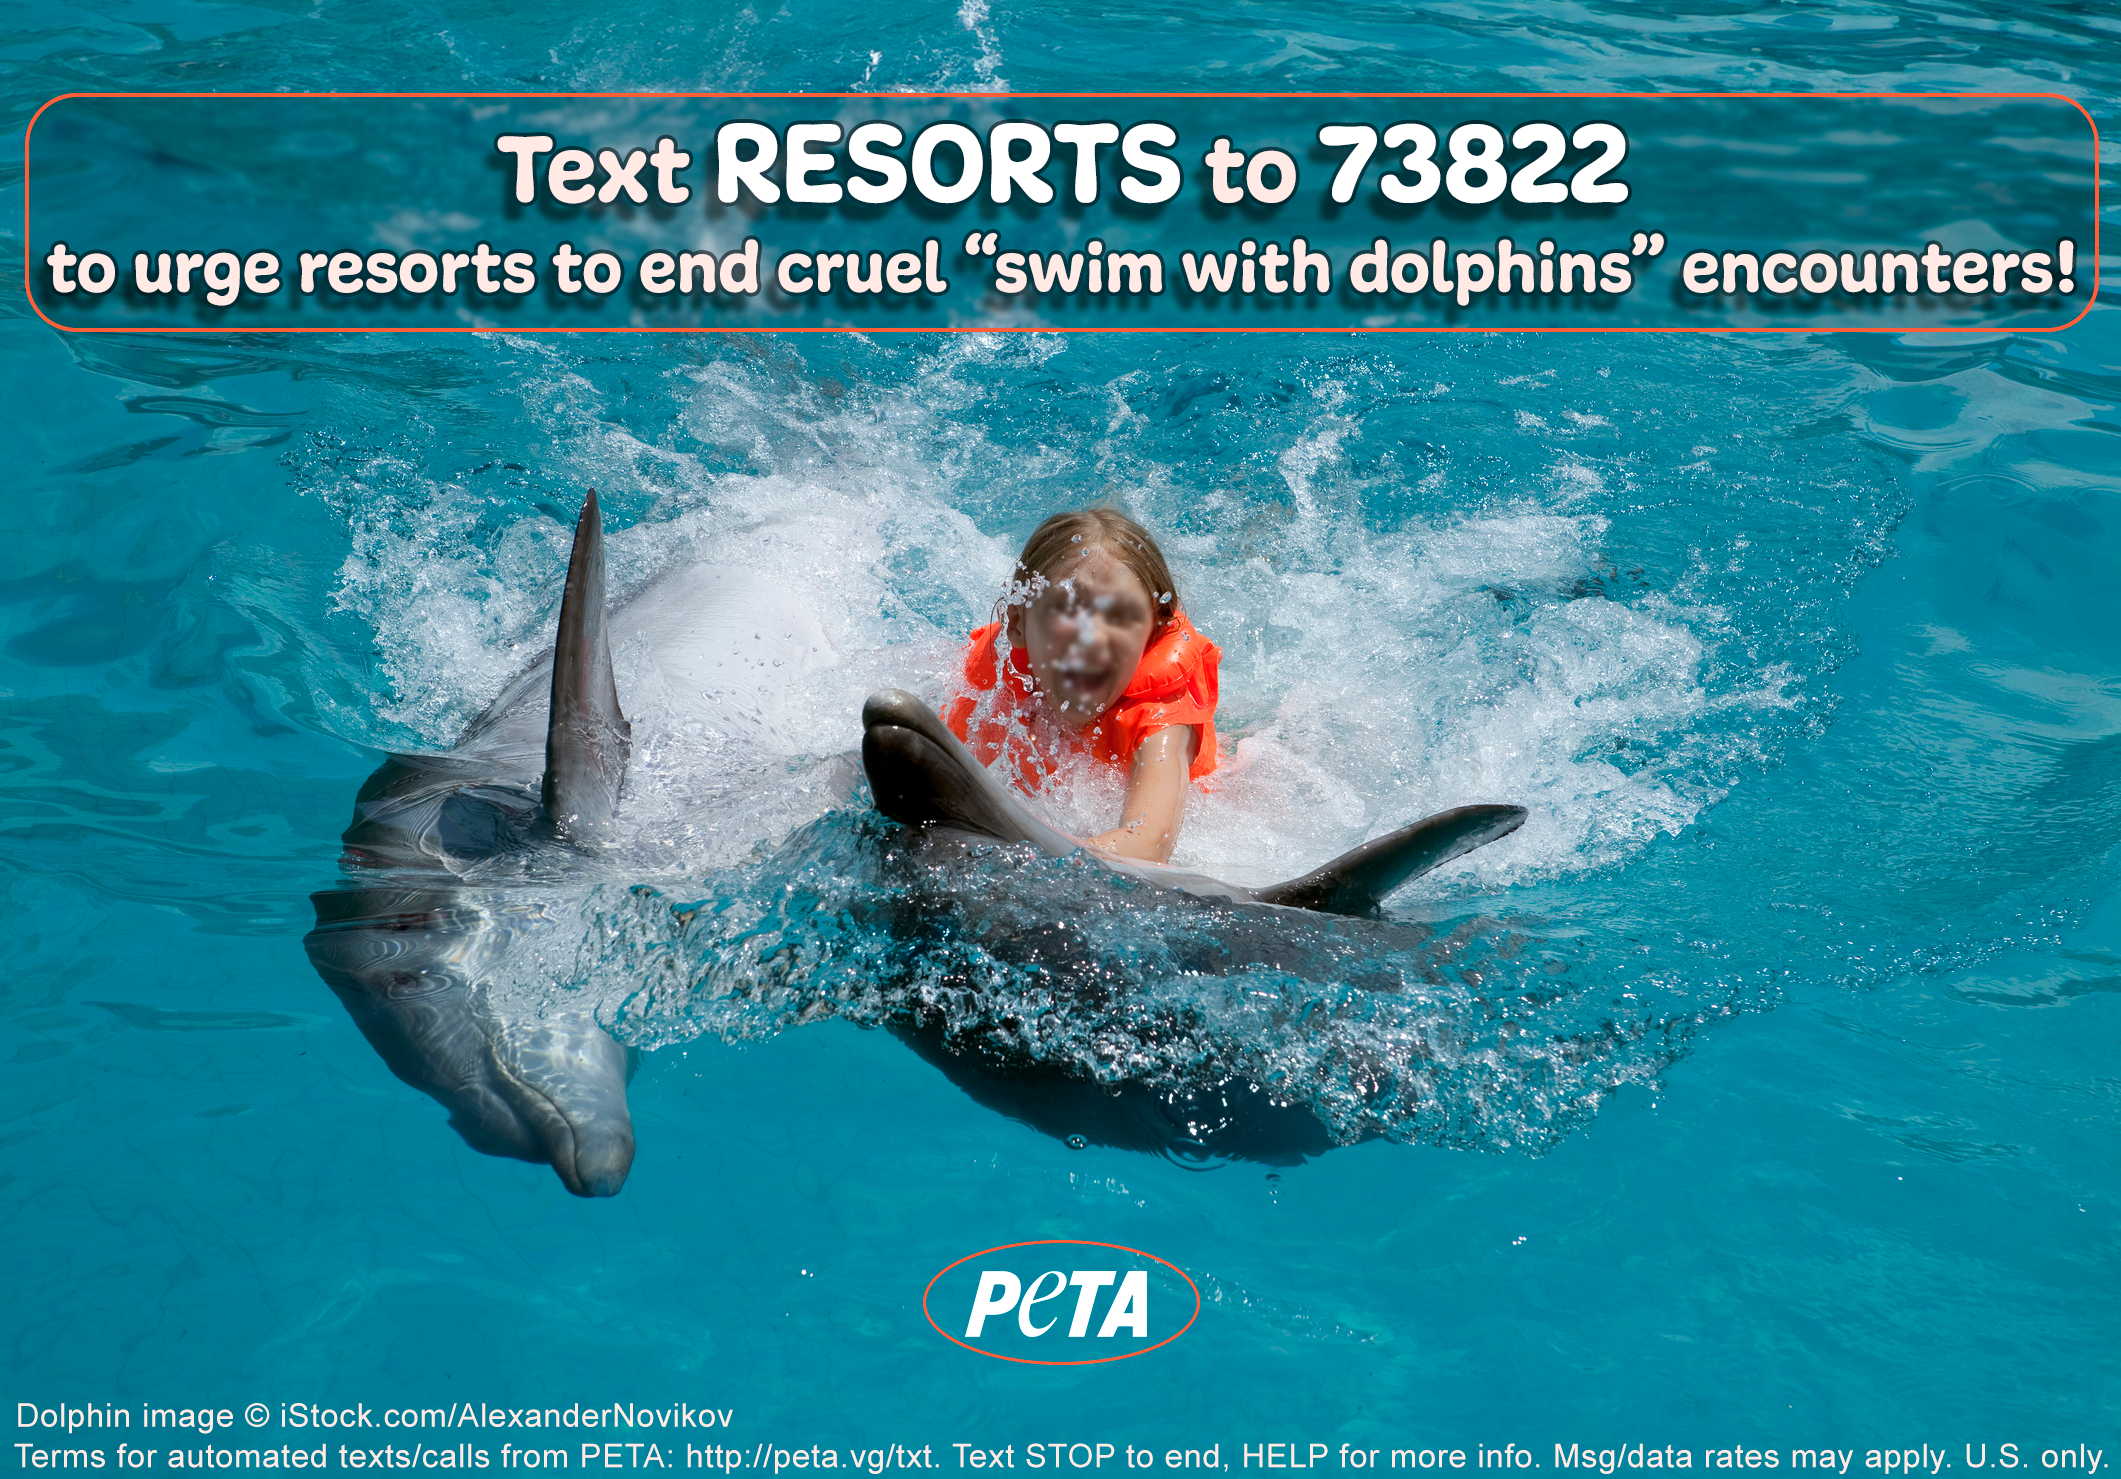 A girl swimming with dolphins. Text RESORTS to 73822 to tell Hawks Cay Resort, The Kahala Hotel & Resort, and Hilton Waikoloa Village to end their cruel “swim with dolphins” encounters and not to permit the breeding or acquisition of more animals on their premises.